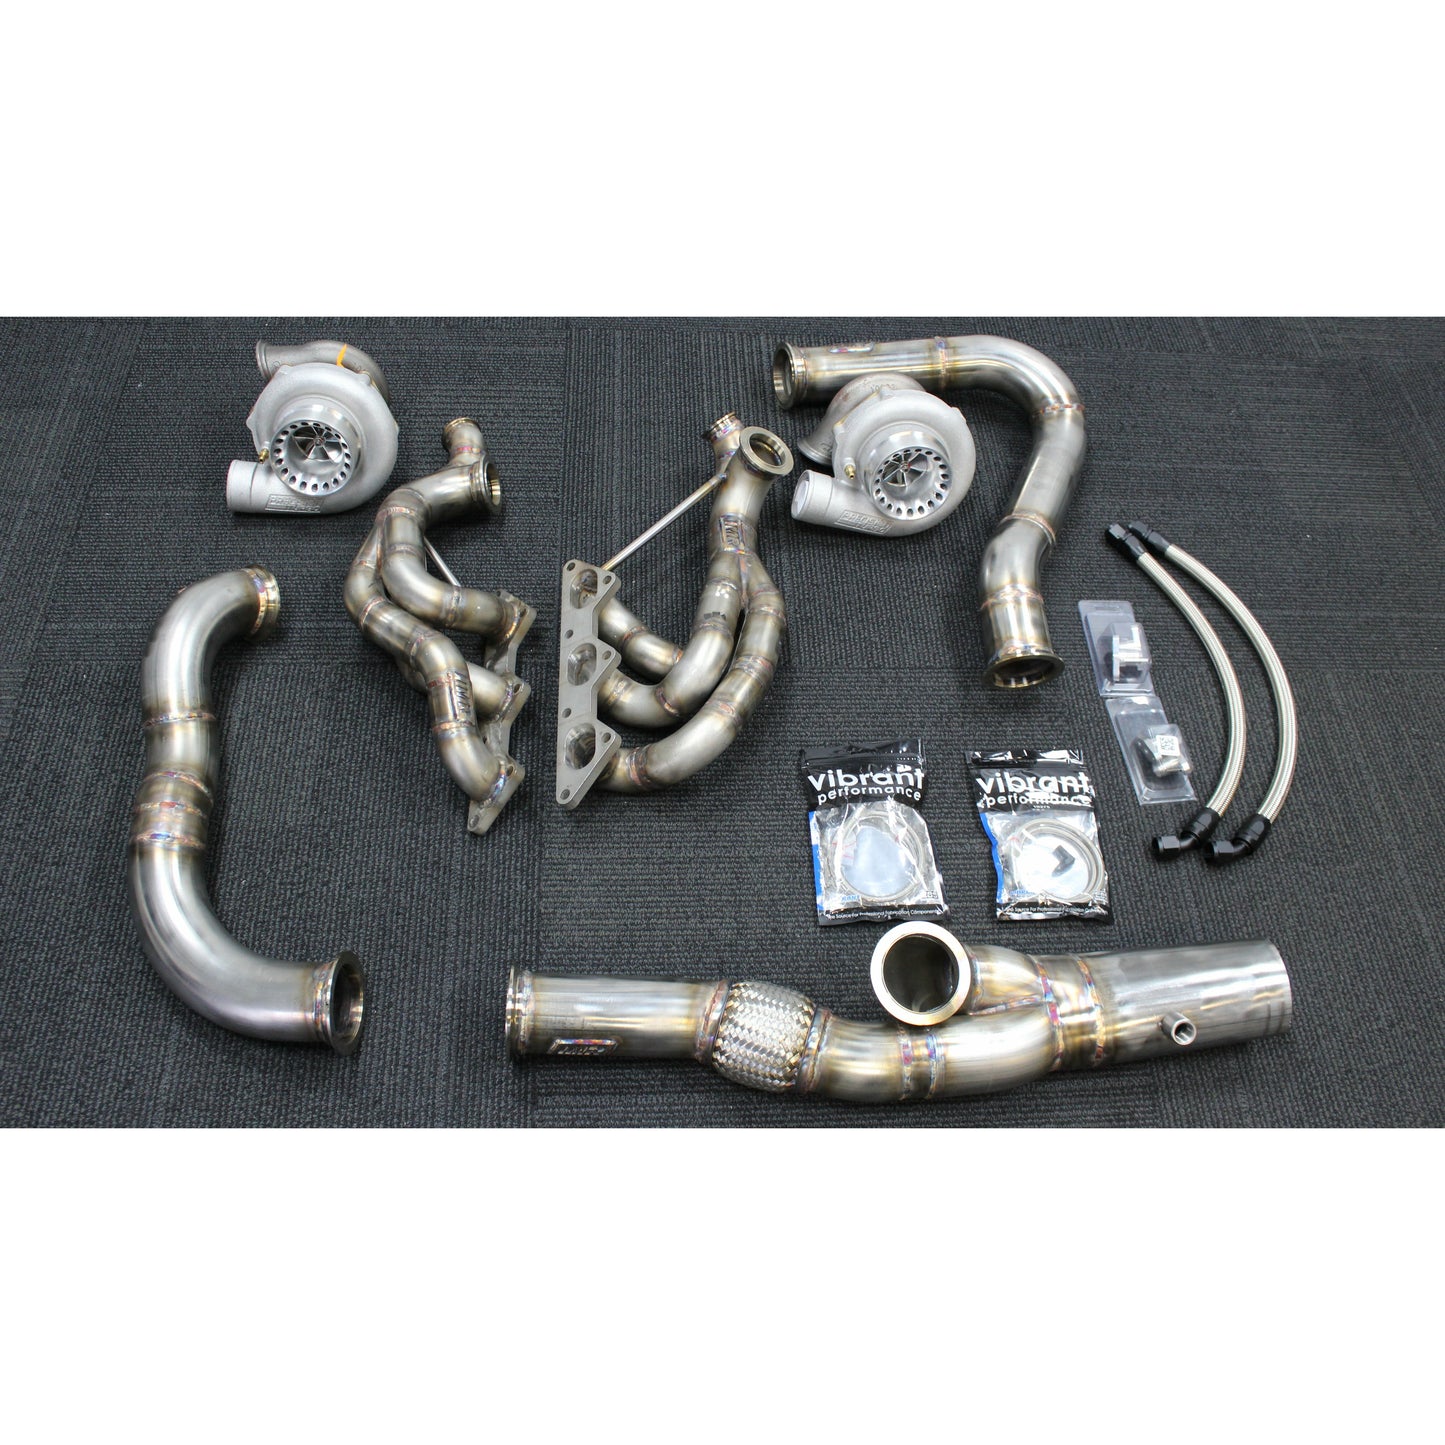 IMR 3000GT and Stealth Twin Turbo Vband Manifold Kit